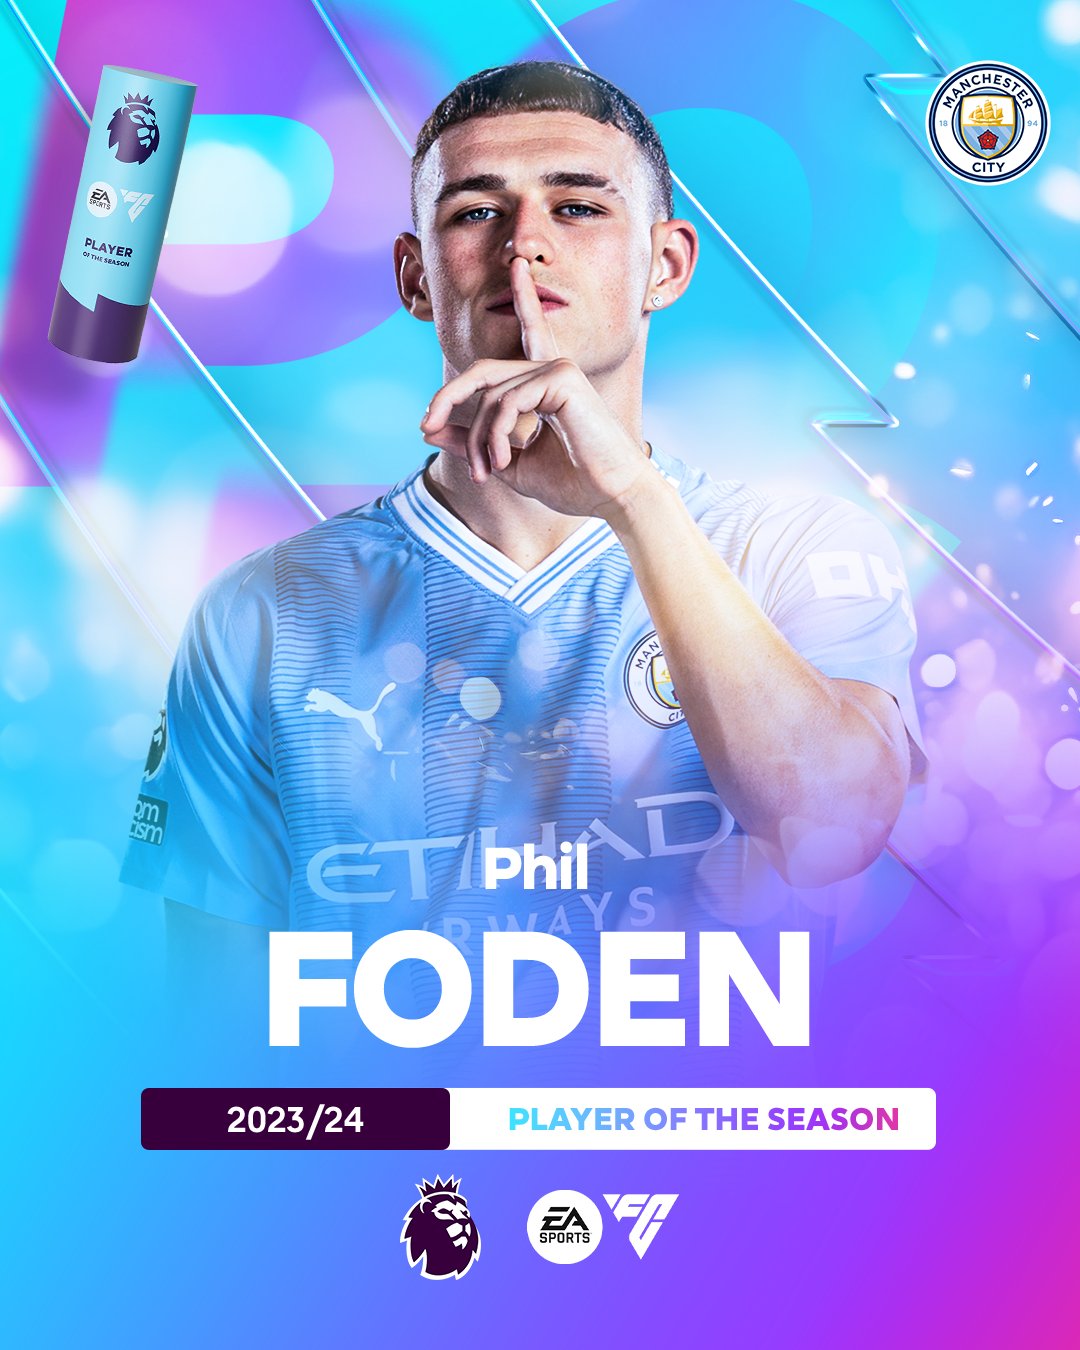 English players to have won the Premier League player of the season award